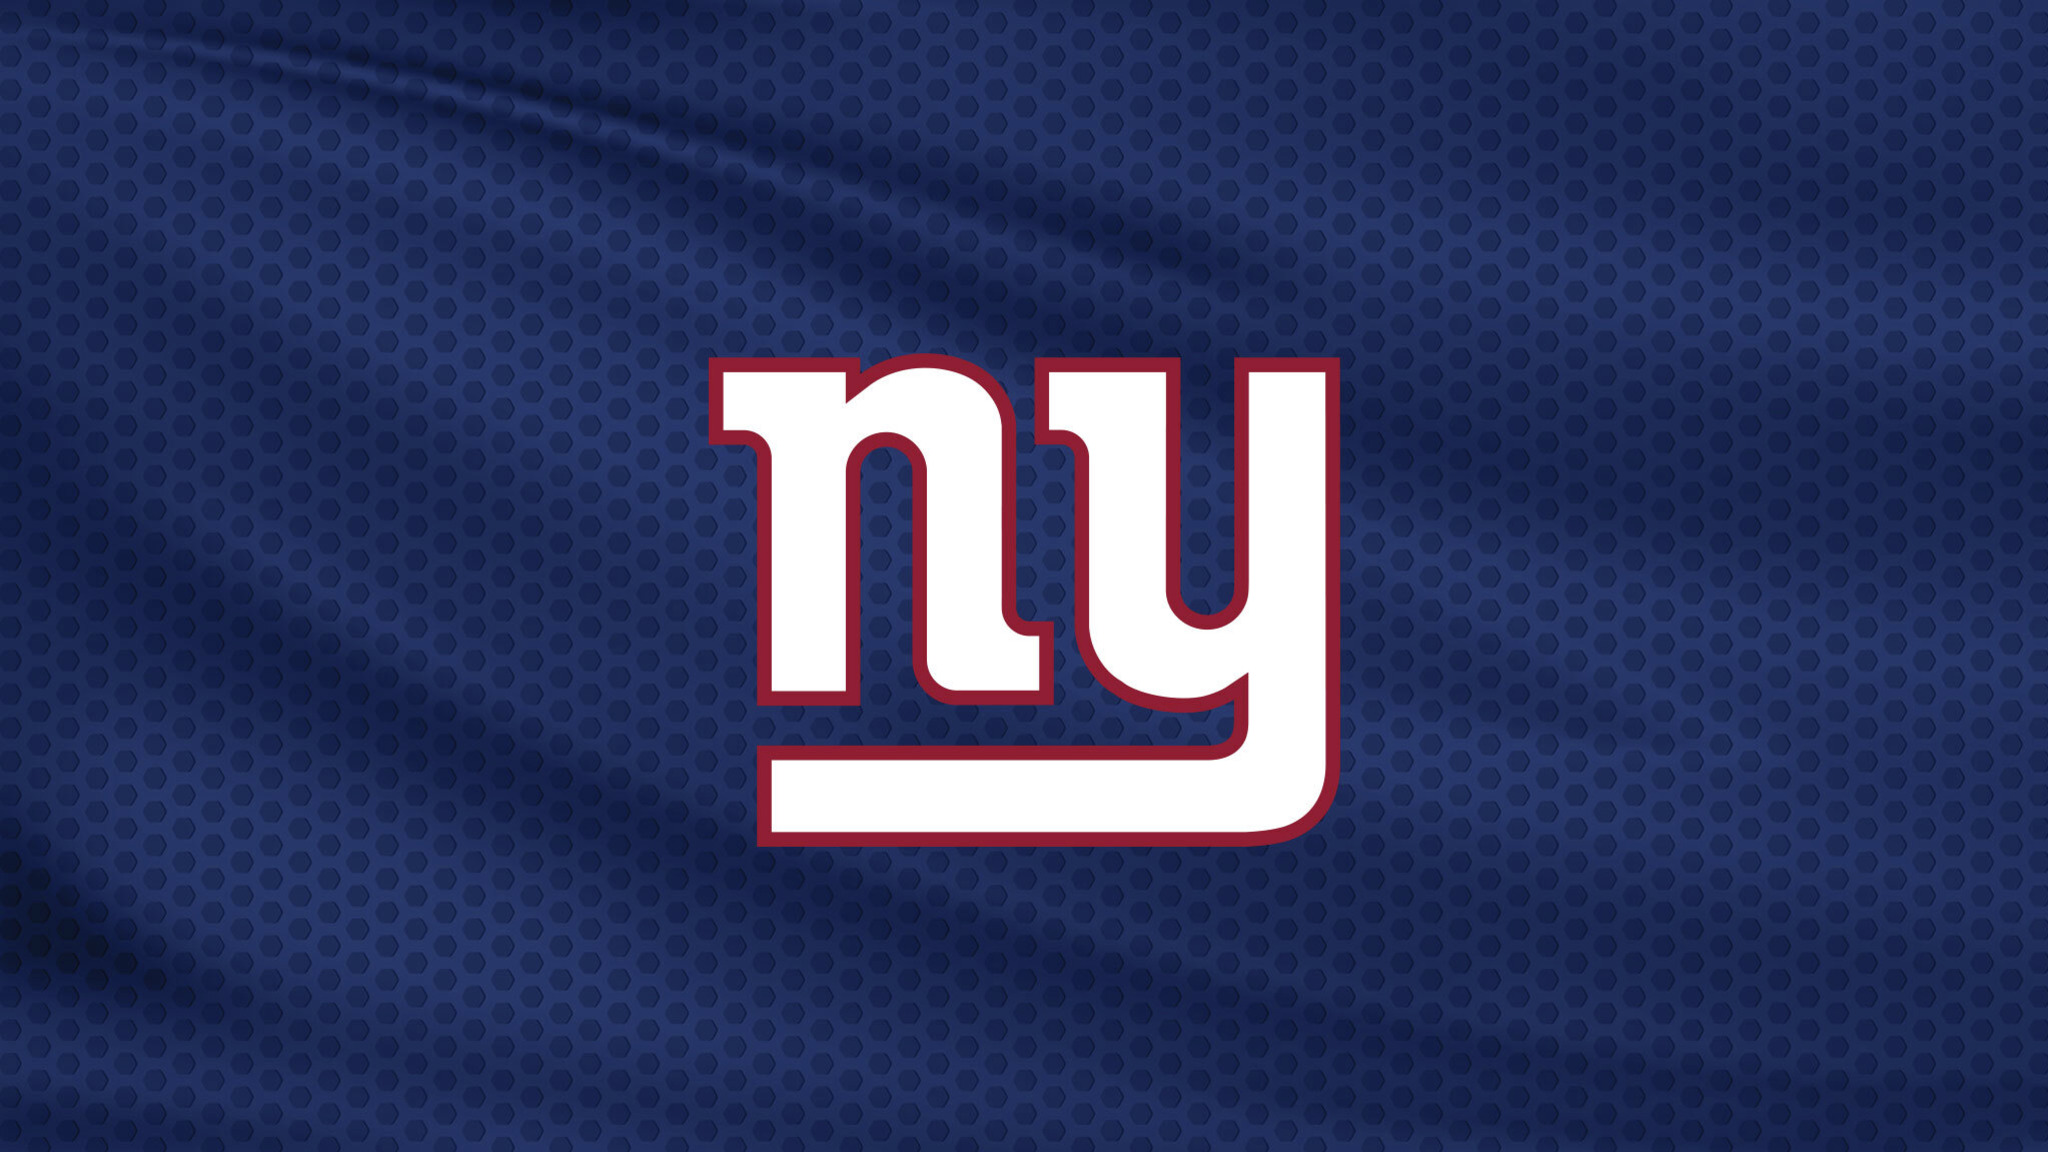 the next new york giants game